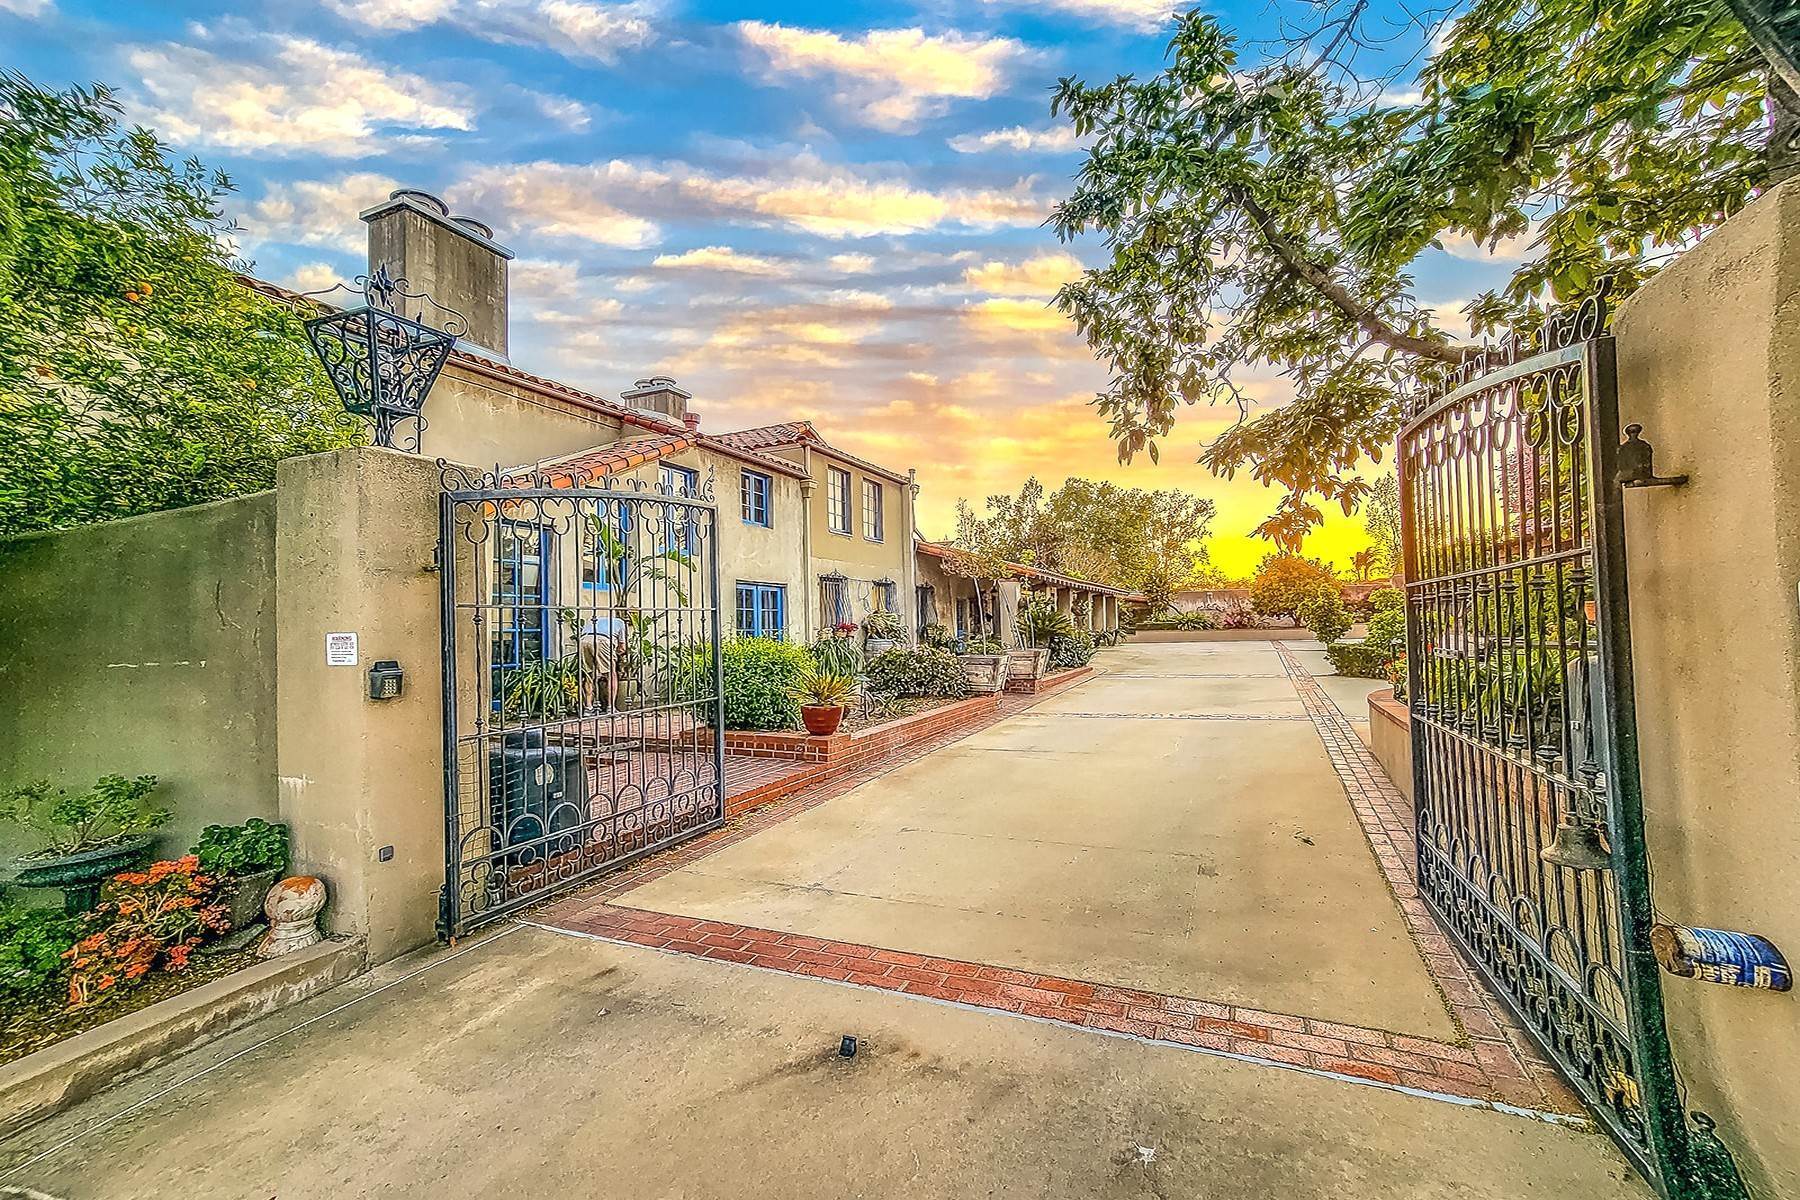 Property for Sale at 805 W. 16th Street, Upland, CA 91784 805 W. 16th Street Upland, California 91784 United States